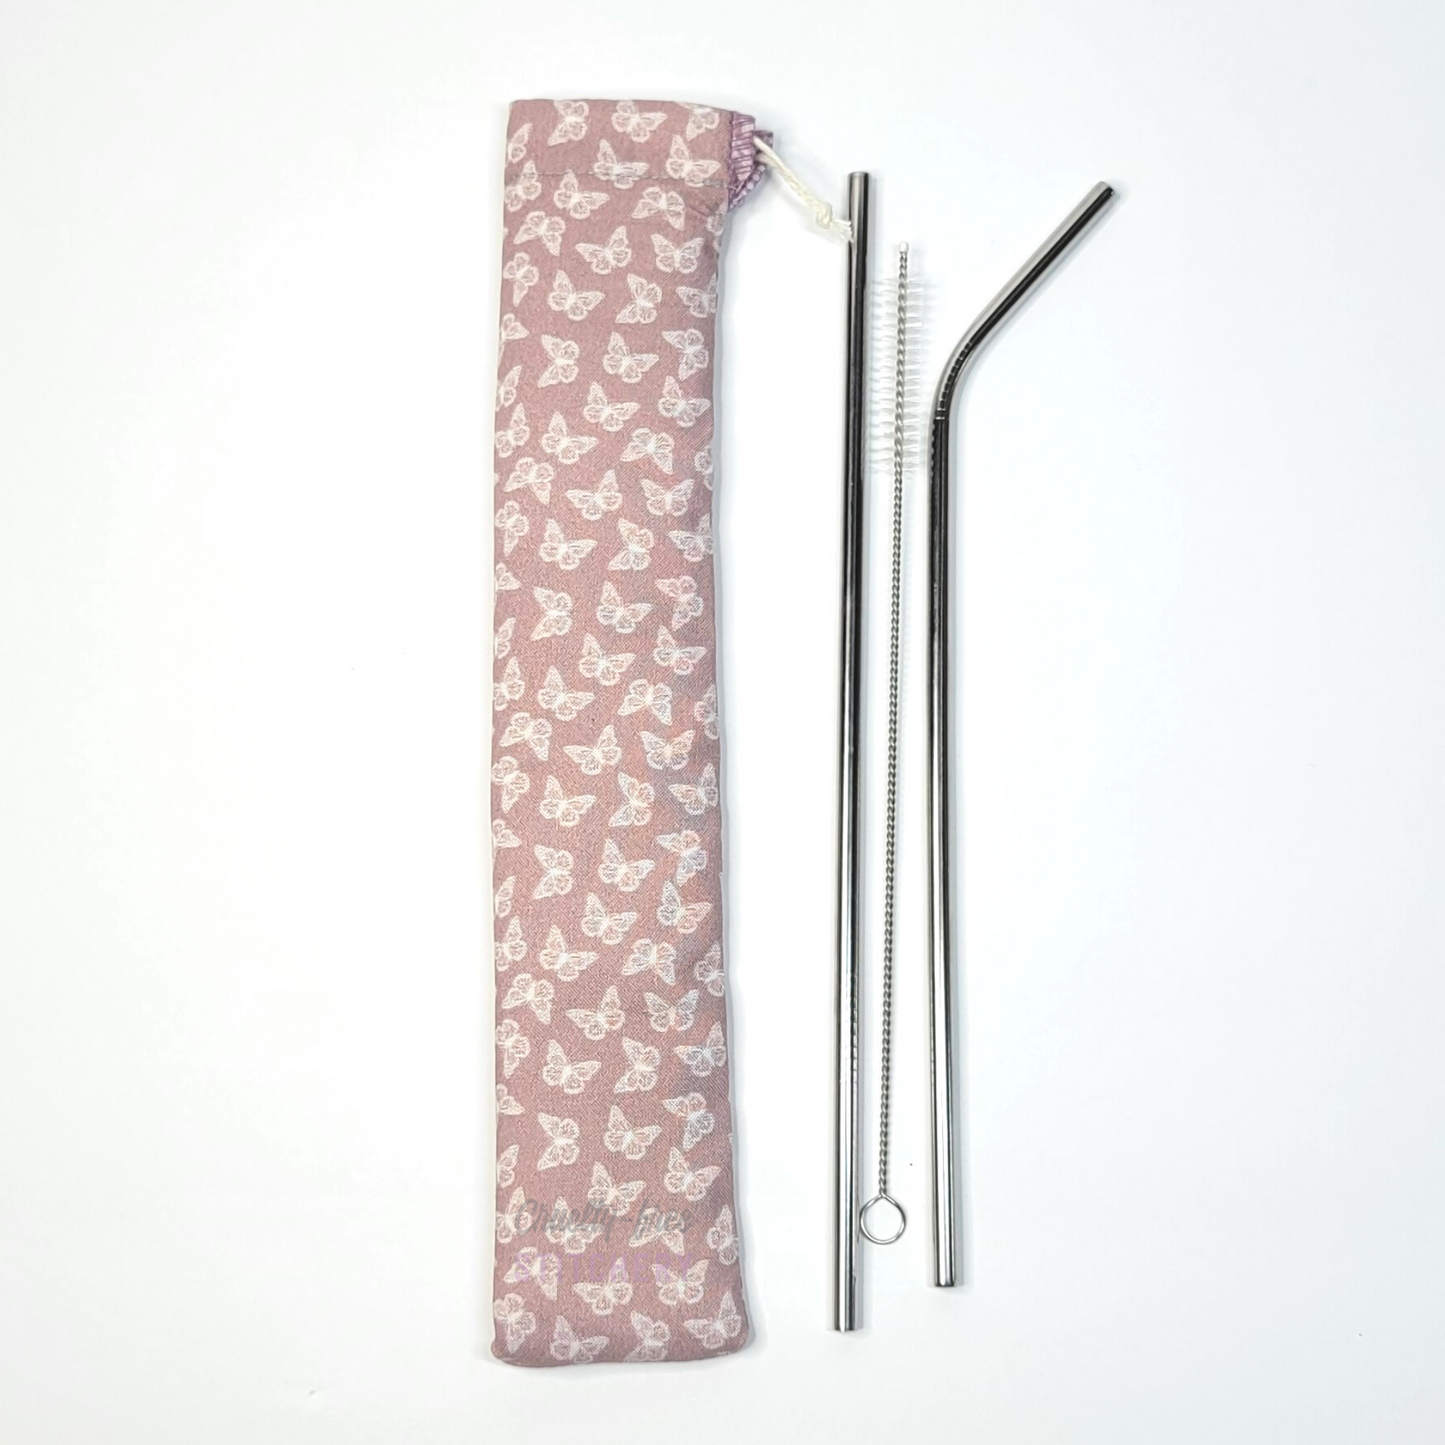 Reusable straw pouch in the same pink butterflies print laying vertically next to a straw cleaner brush, a straight stainless steel straw, and a bent stainless steel straw.